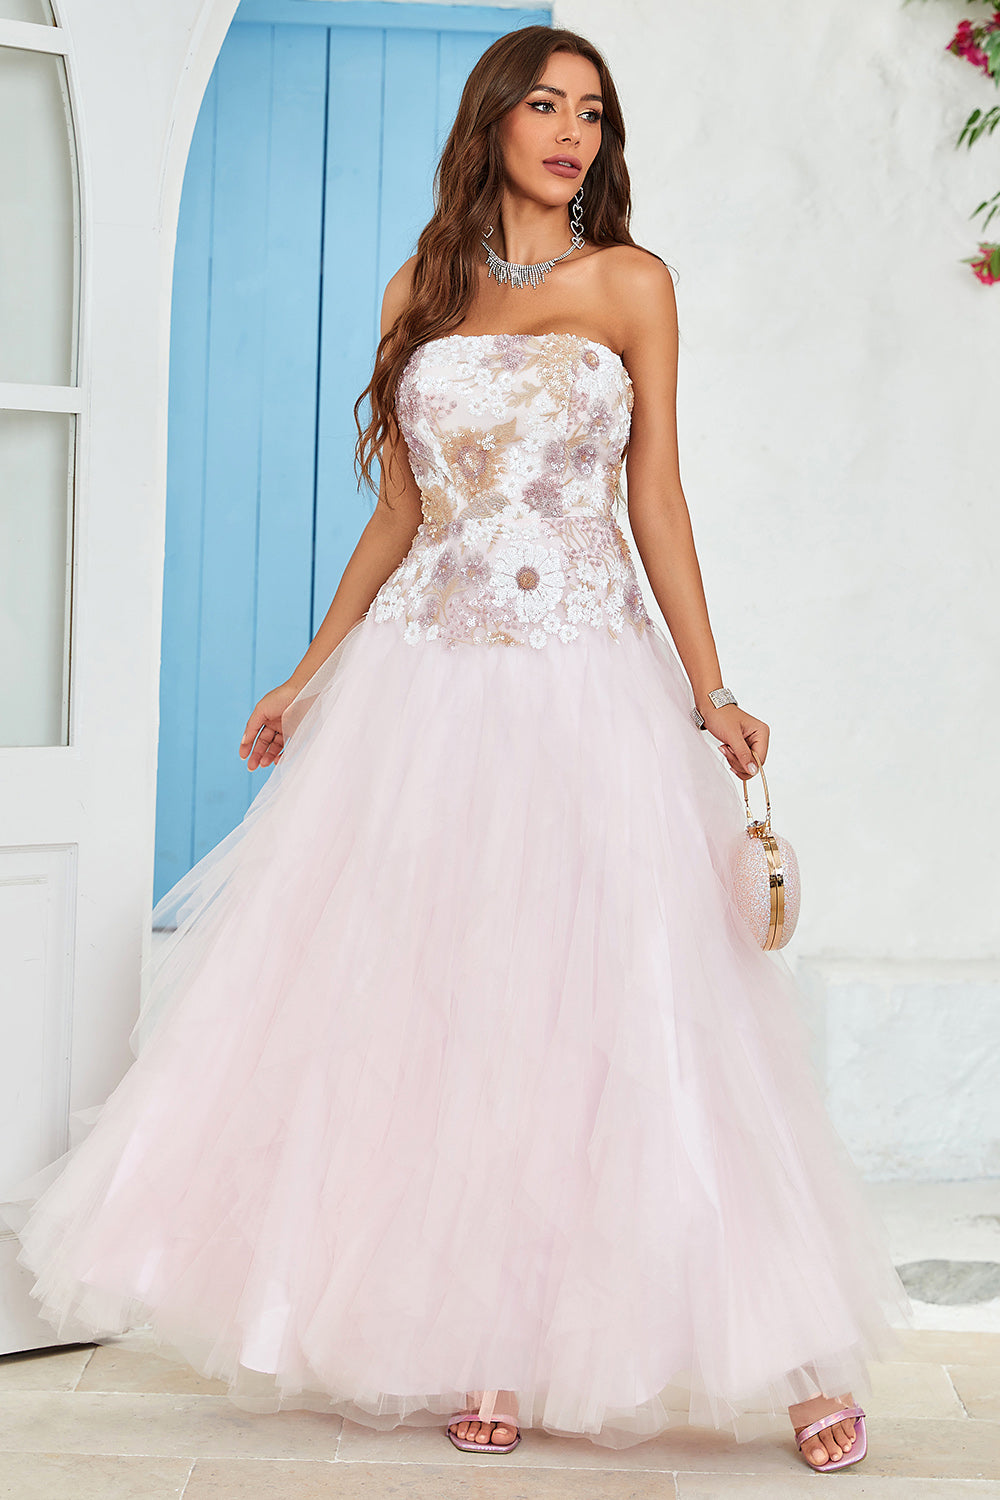 Strapless A Line Pink Tulle Prom Dress with Appliques